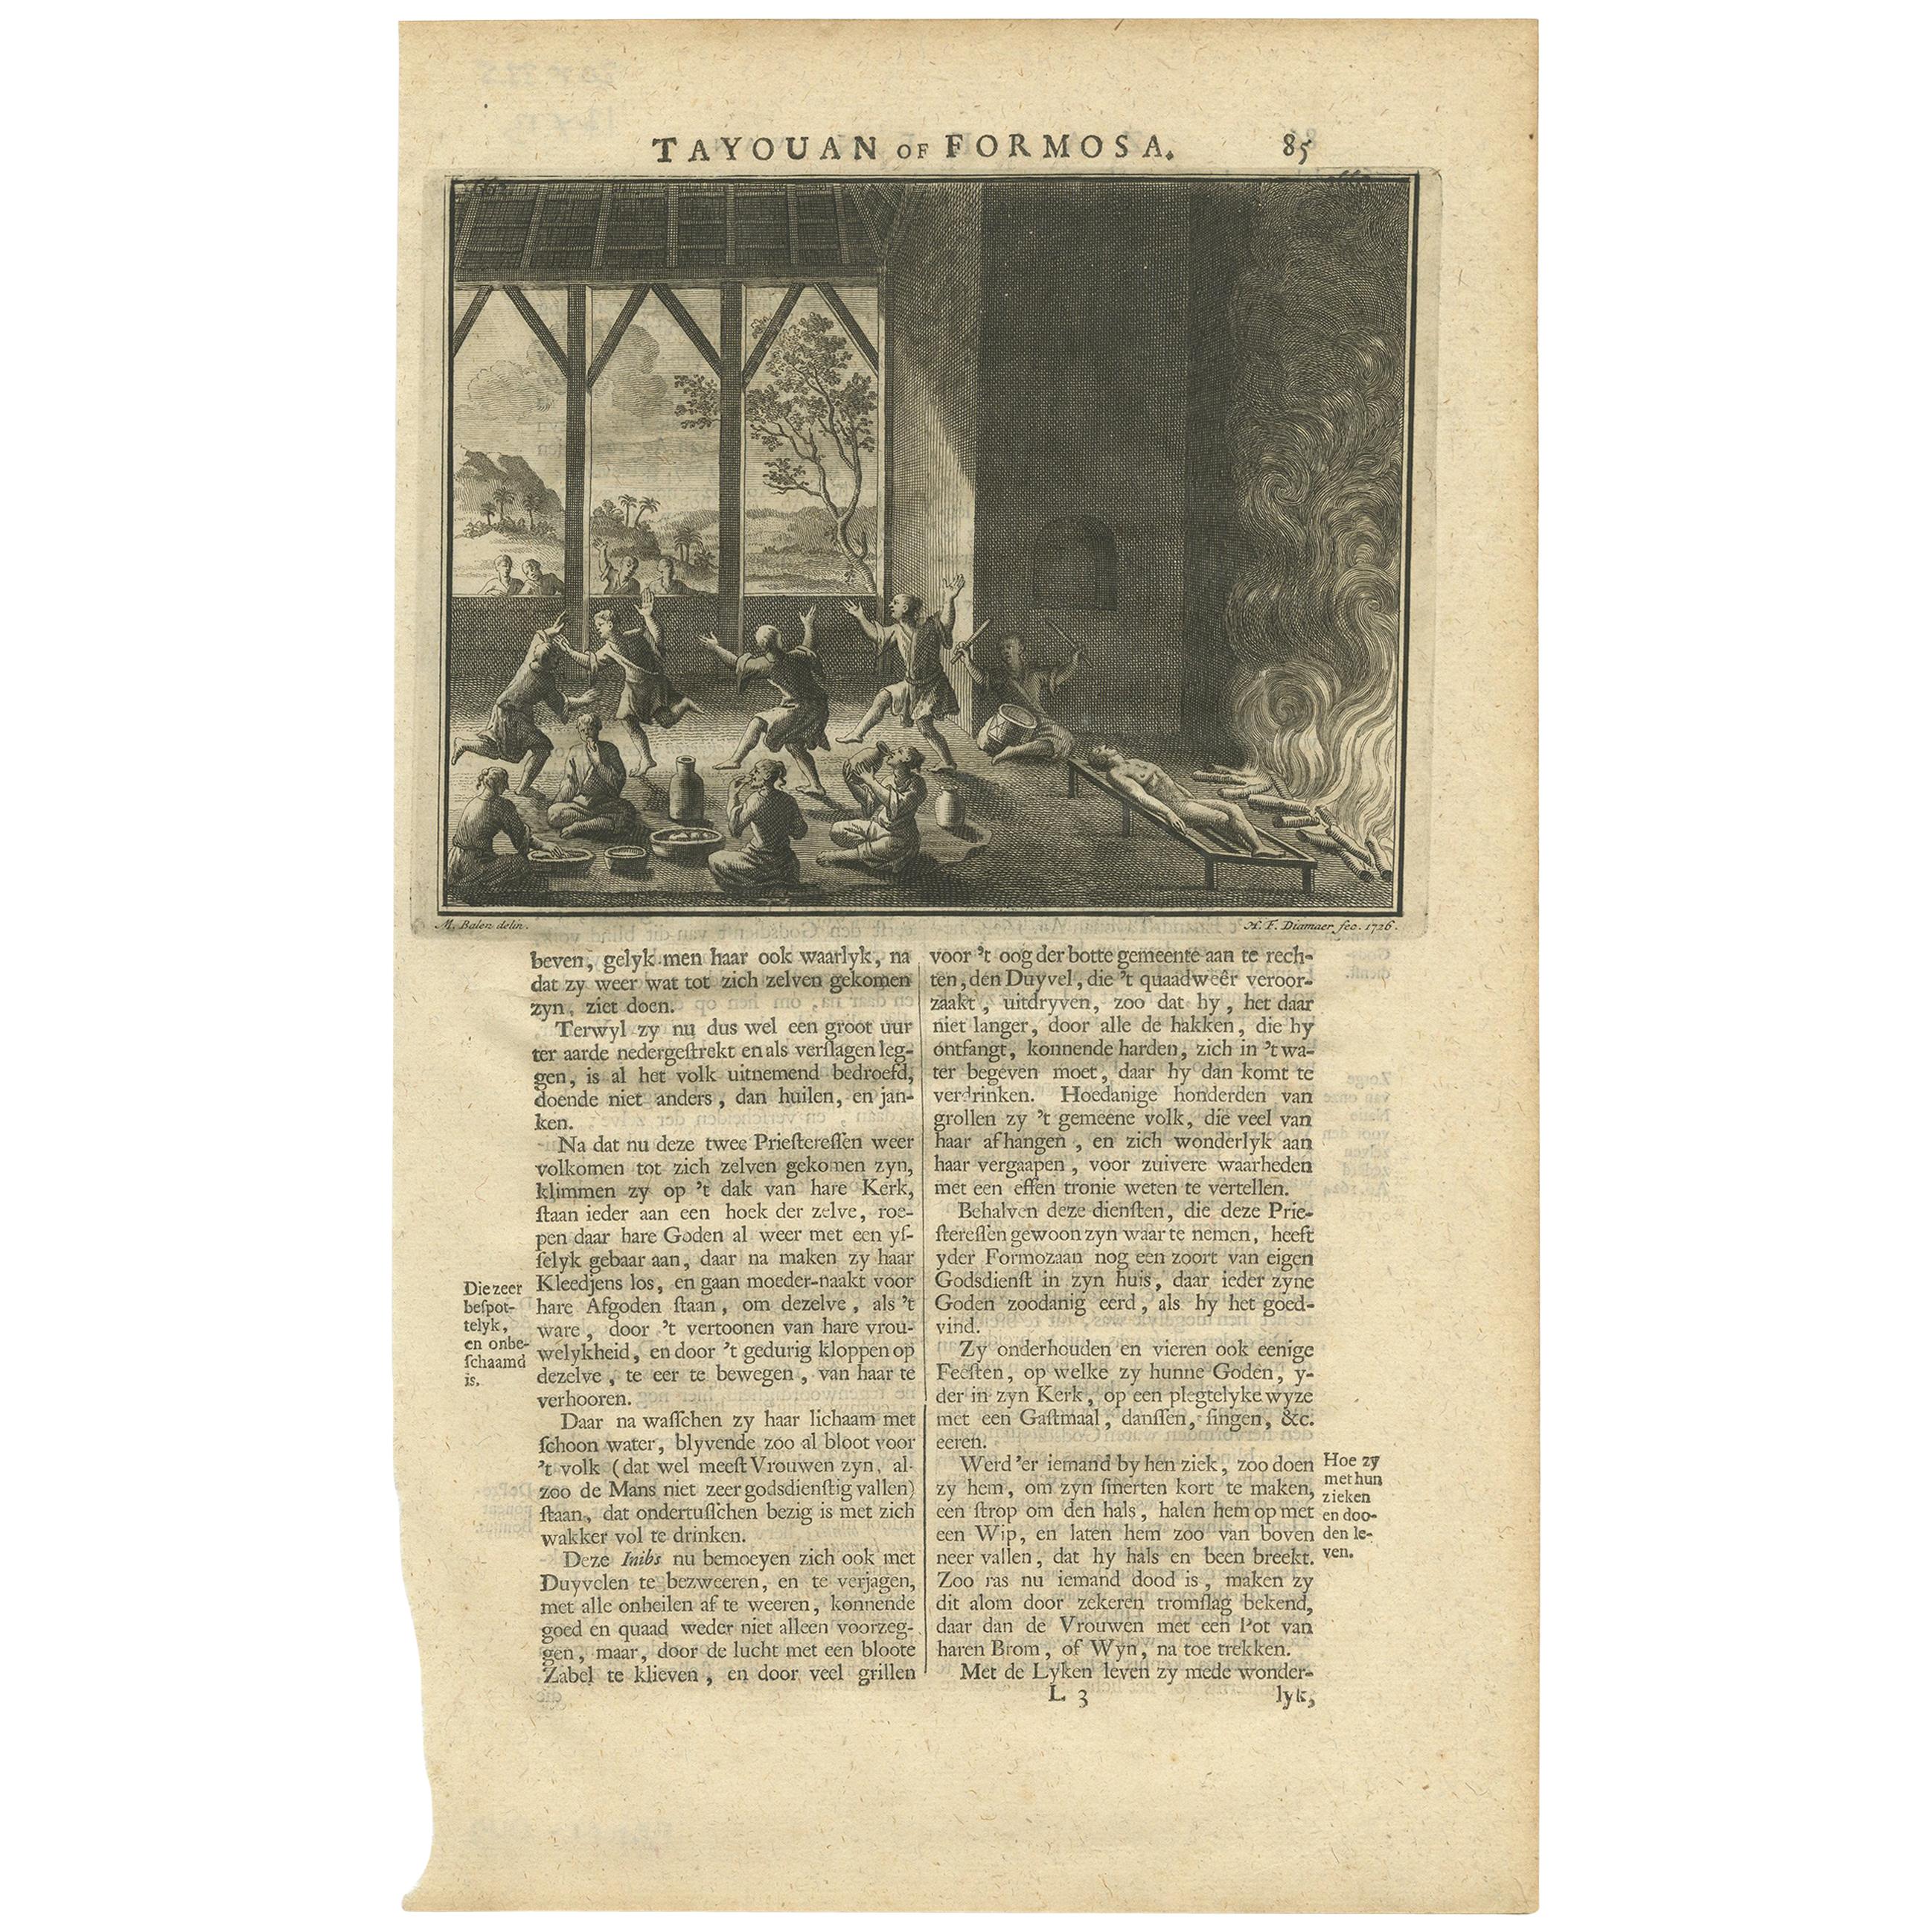 Antique Print of a Ritual on Formosa by Valentijn, 1726